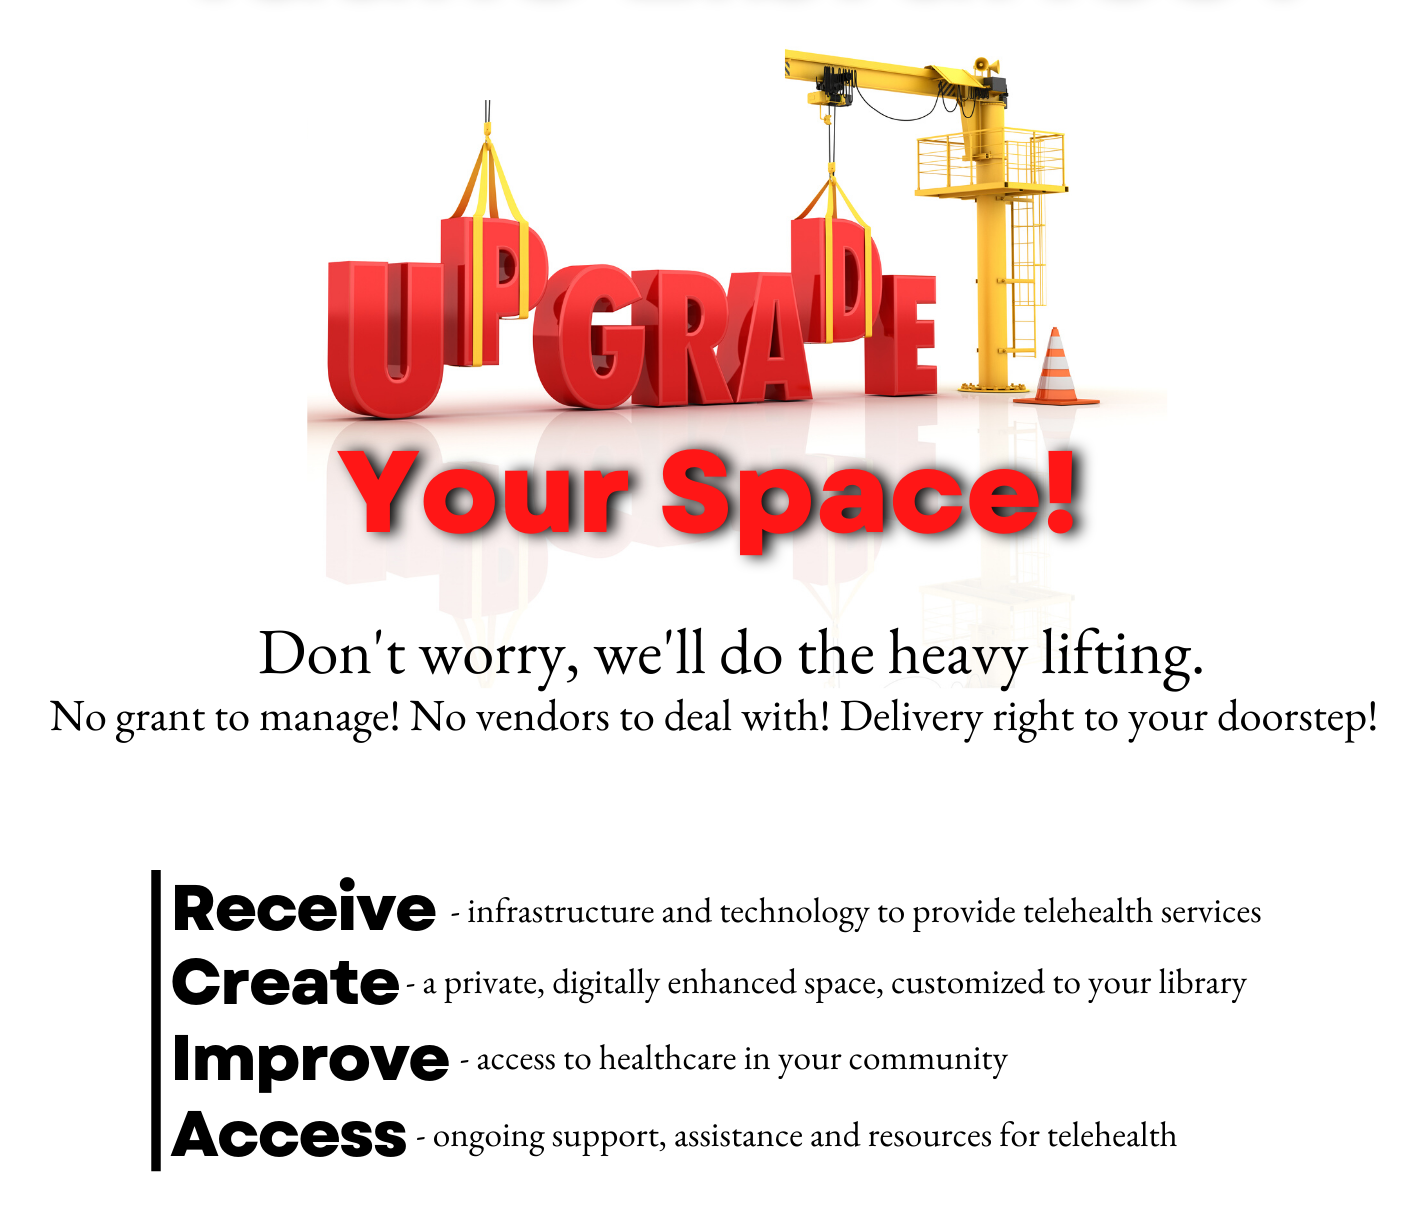 Construction crane lifting large letters that form the words "Upgrade your space" followed by basic details of the program. Text within the image reads "Don't worry, we'll do all the heavy lifting. No grant to manage! No vendors to deal with! Delivery right to your doorstep! Receive infrastructure and technology to provide telehealth services. Create a private, digitally enhanced space, customized to your library. Improve access to healthcare in your community. Access ongoing support, assistance and resources for telehealth.